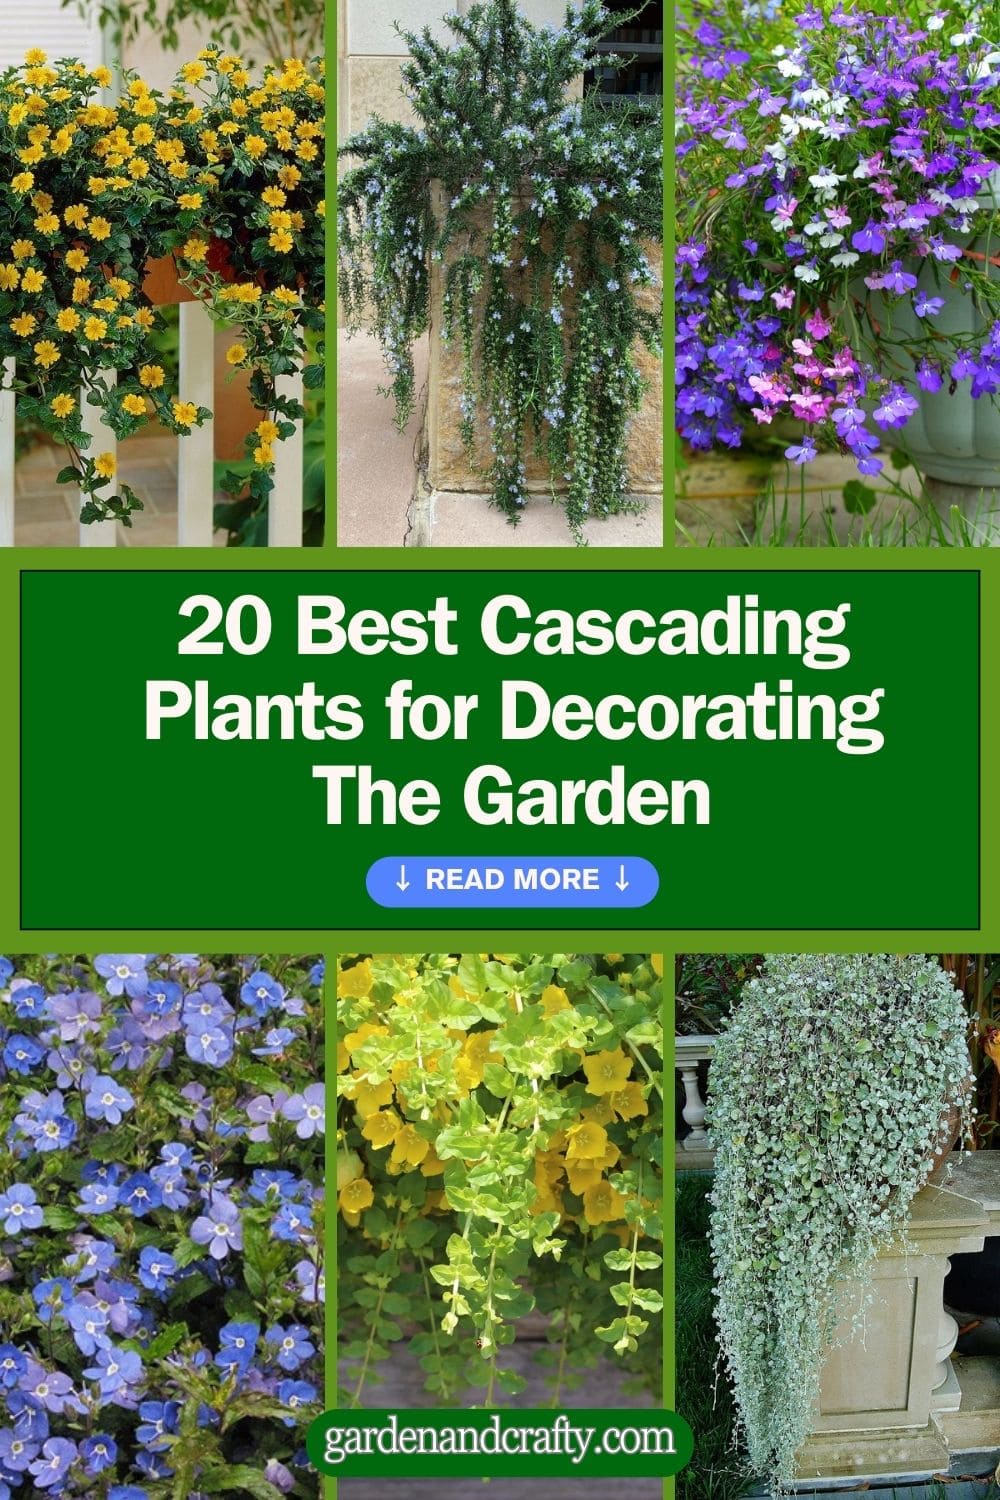 20 Best Cascading Plants for Decorating The Garden